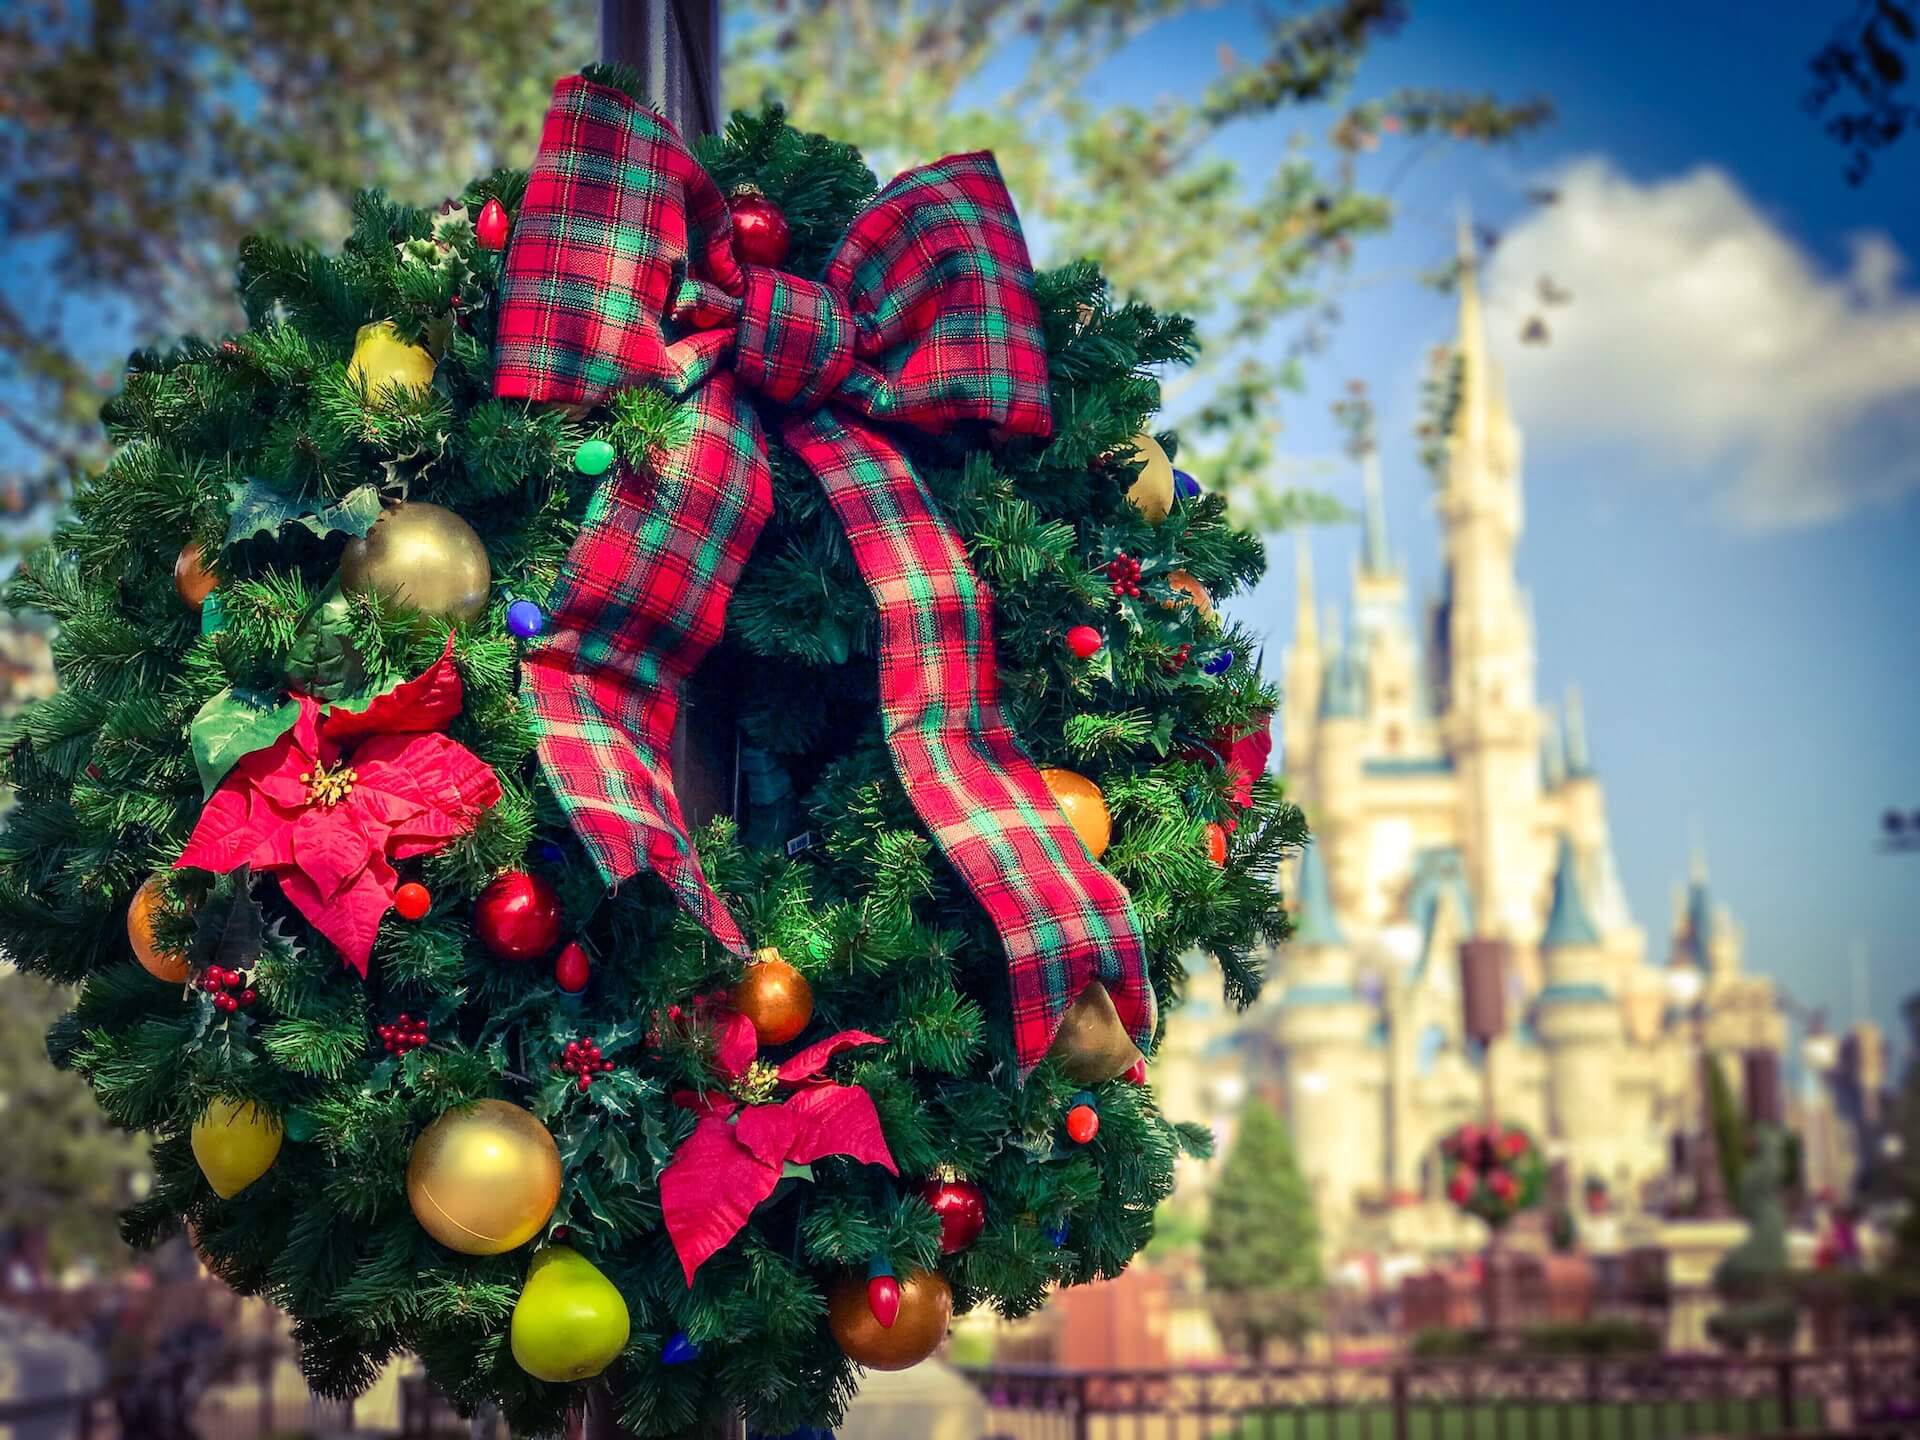 A festive wreath hangs in the foreground, with the Magic Kingdom castle in the background